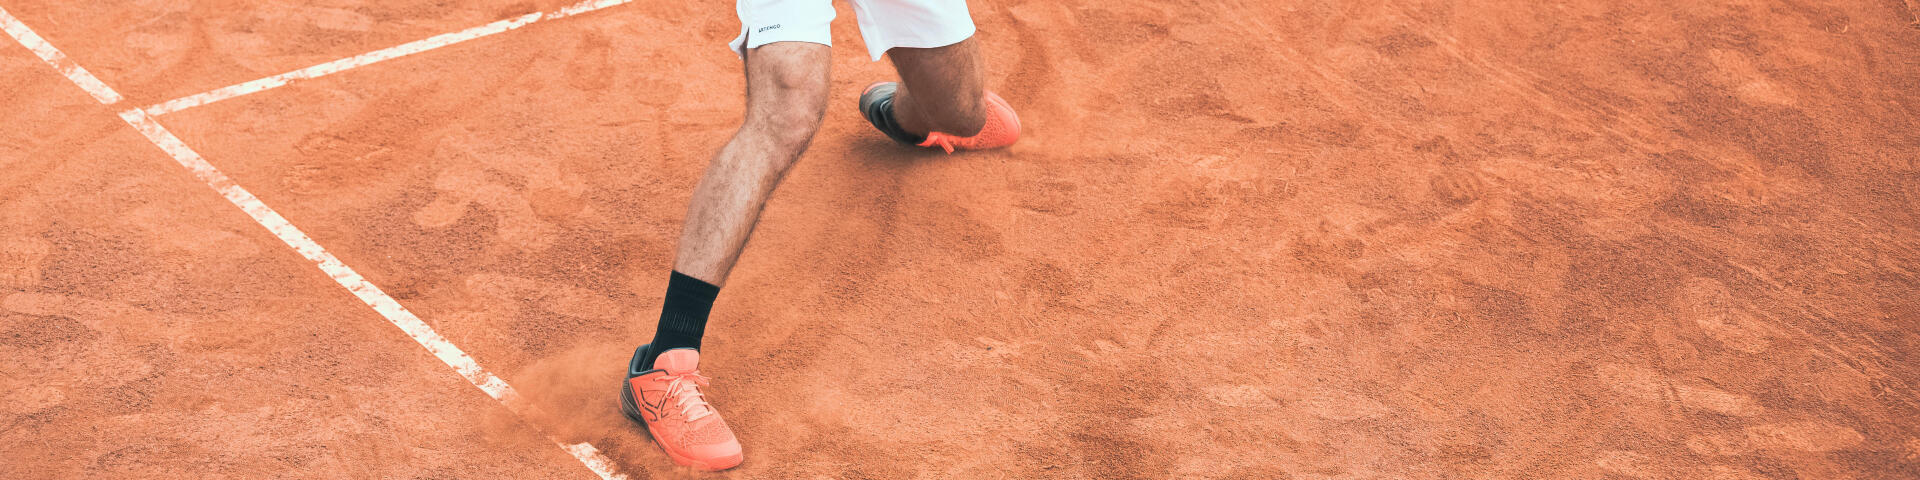 Tennis: what is the difference between clay and grass?